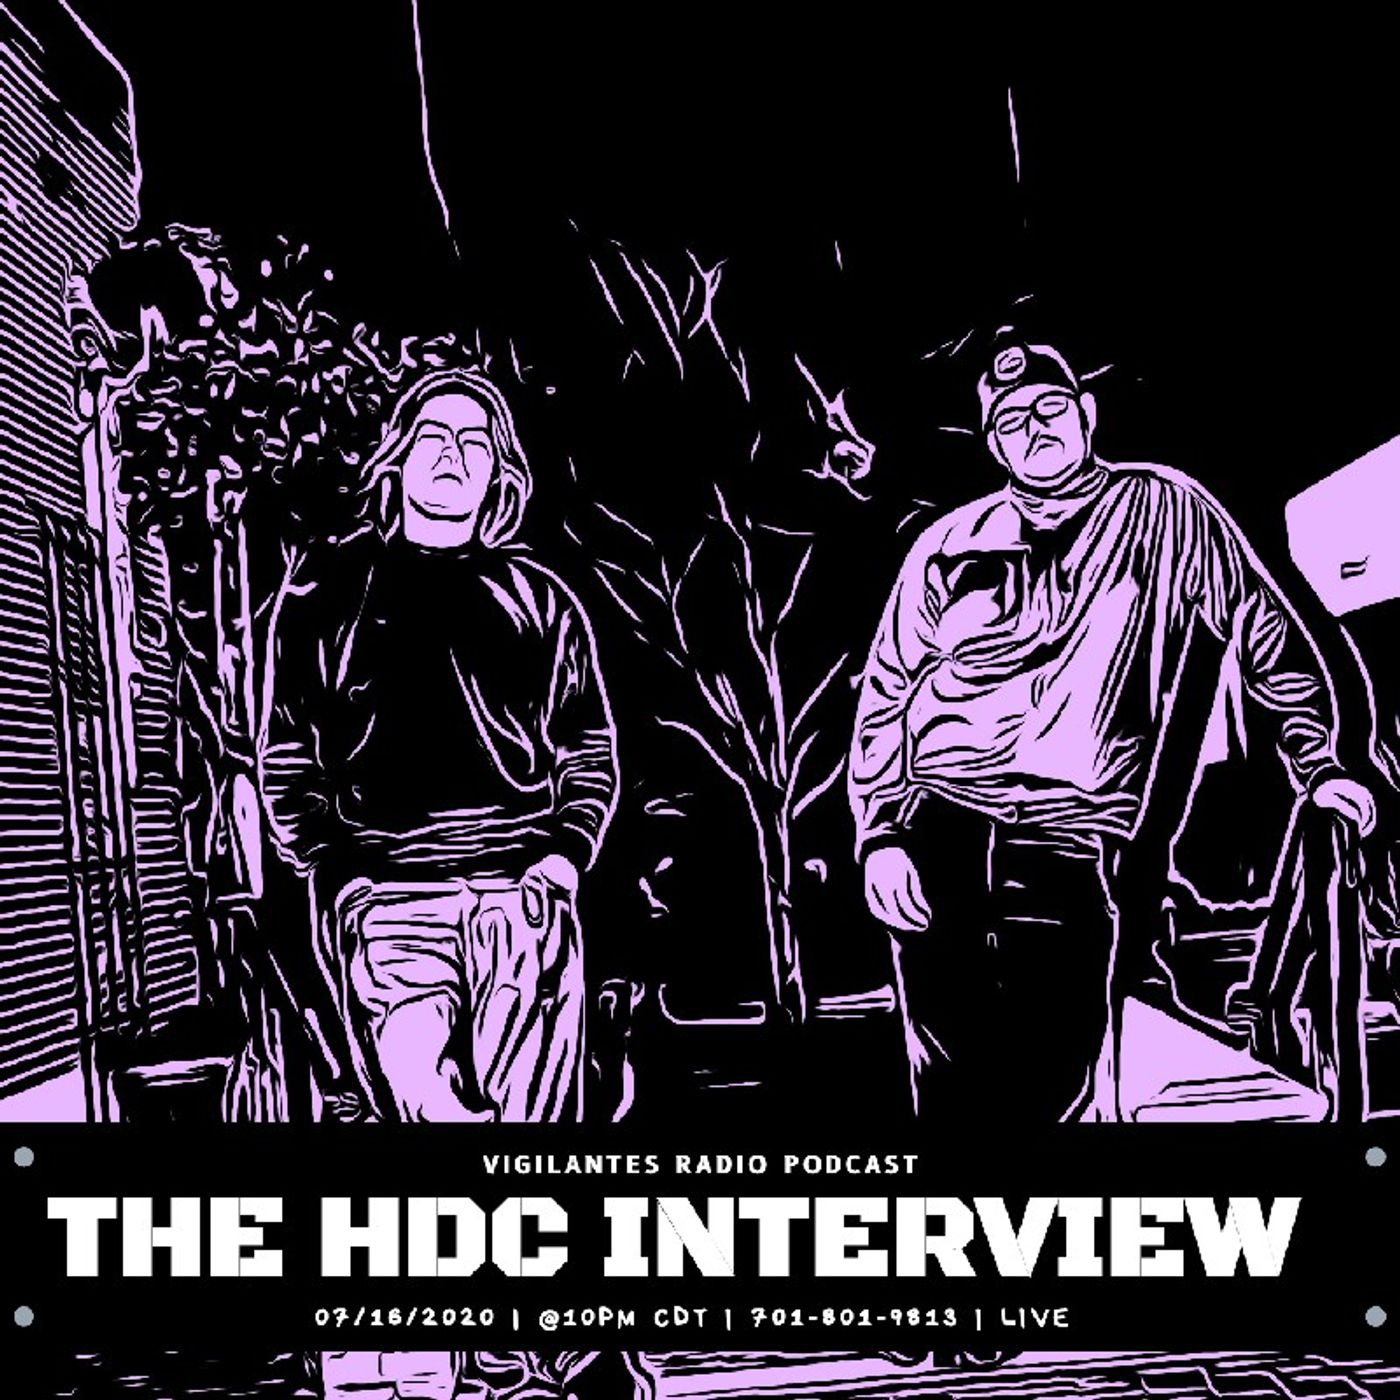 The HDC Interview. Image